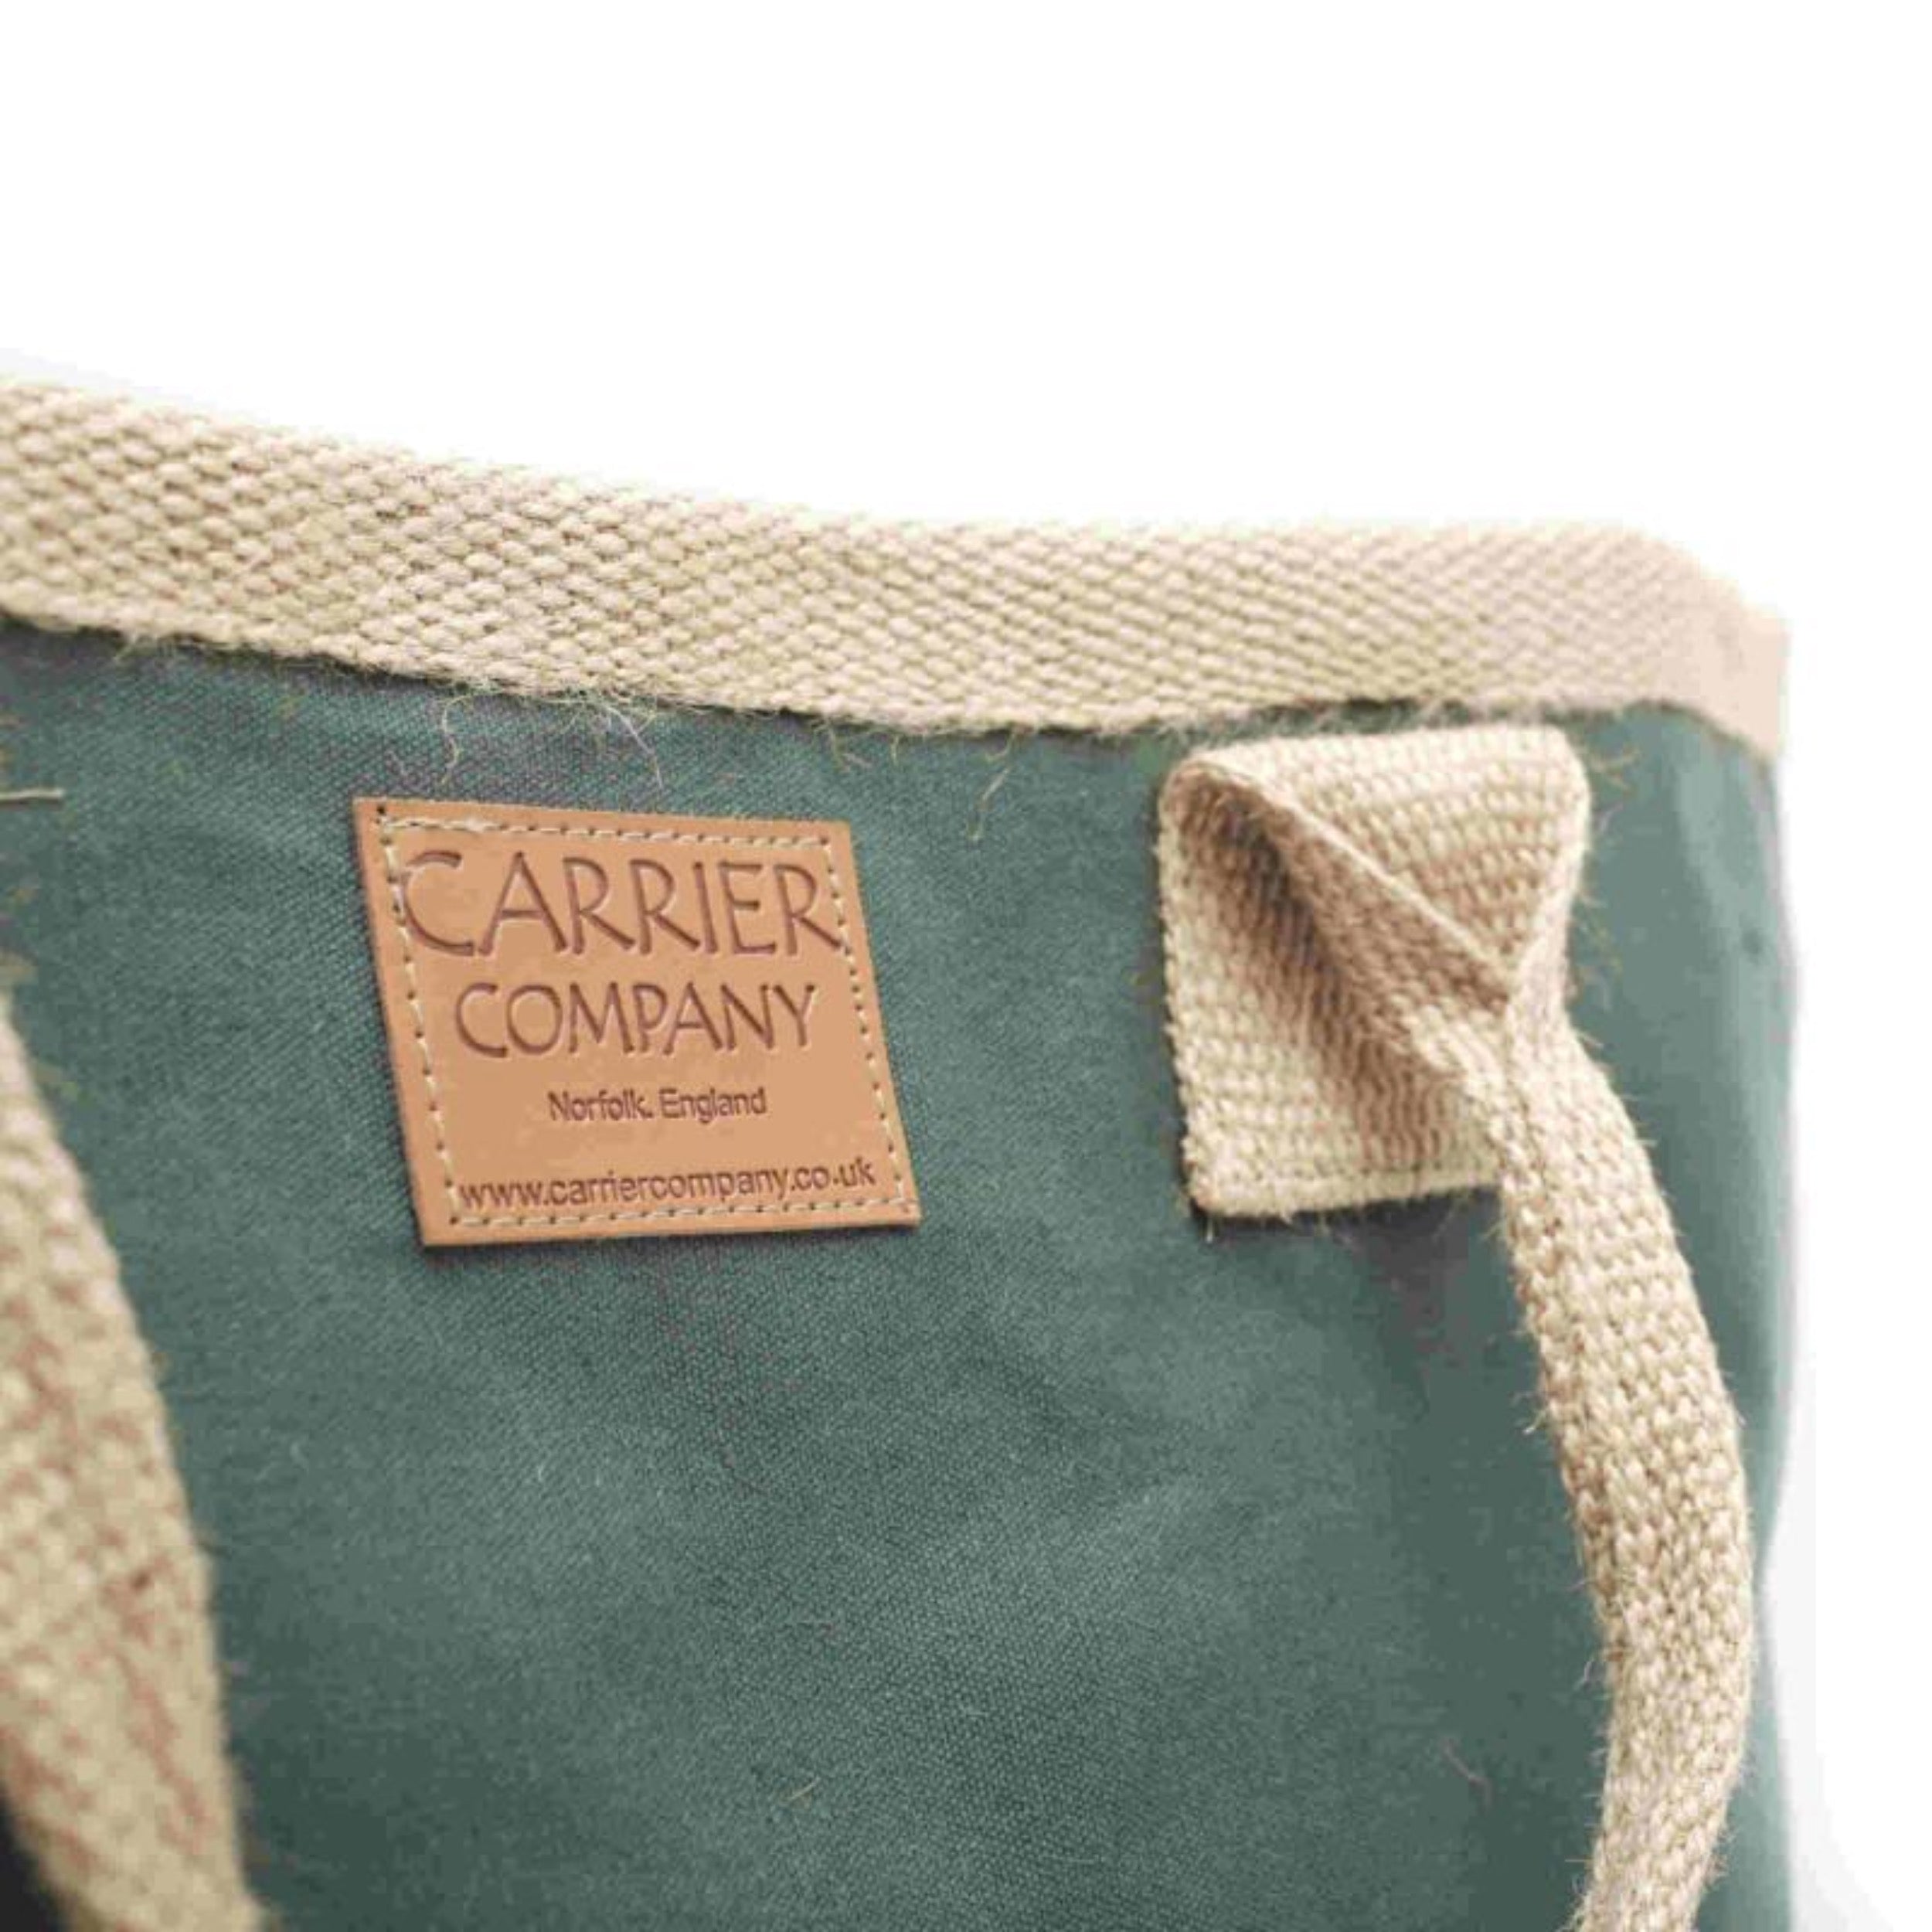 Carrier Company Sturdy Bag in Spruce Green